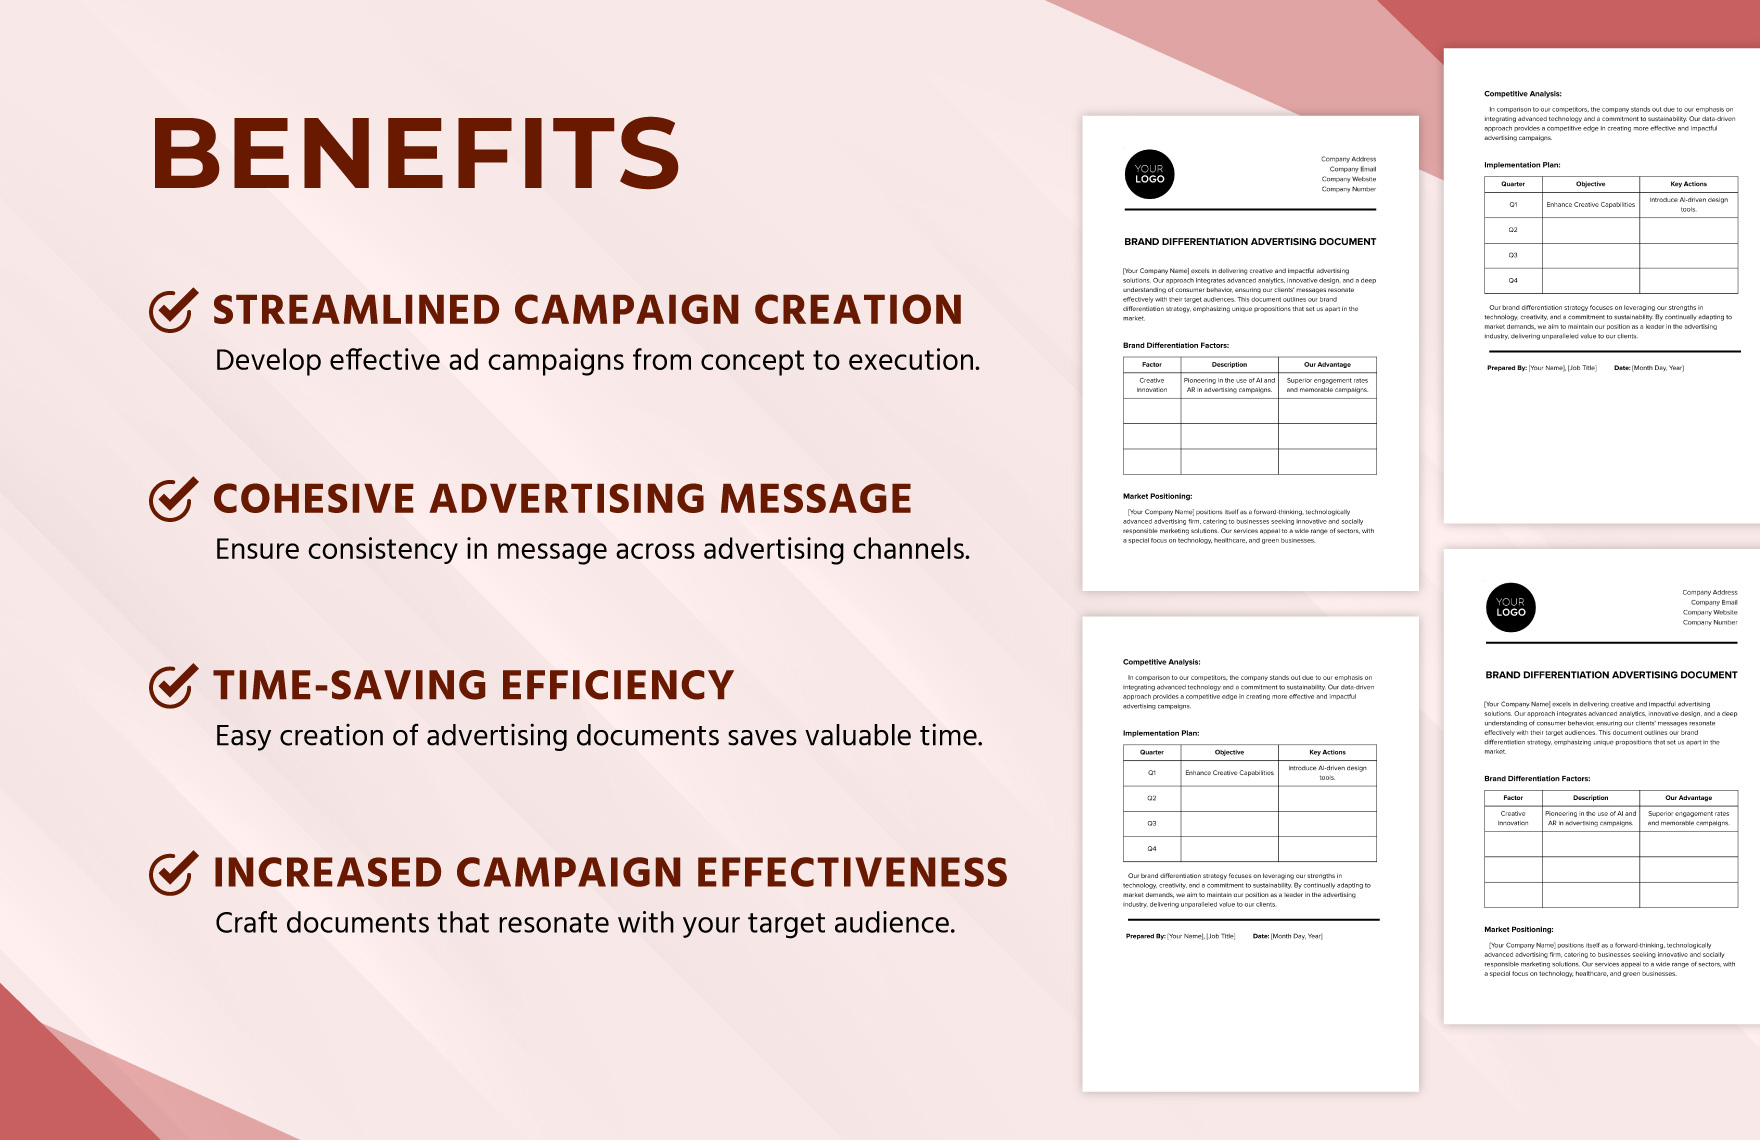 Brand Differentiation Advertising Document Template